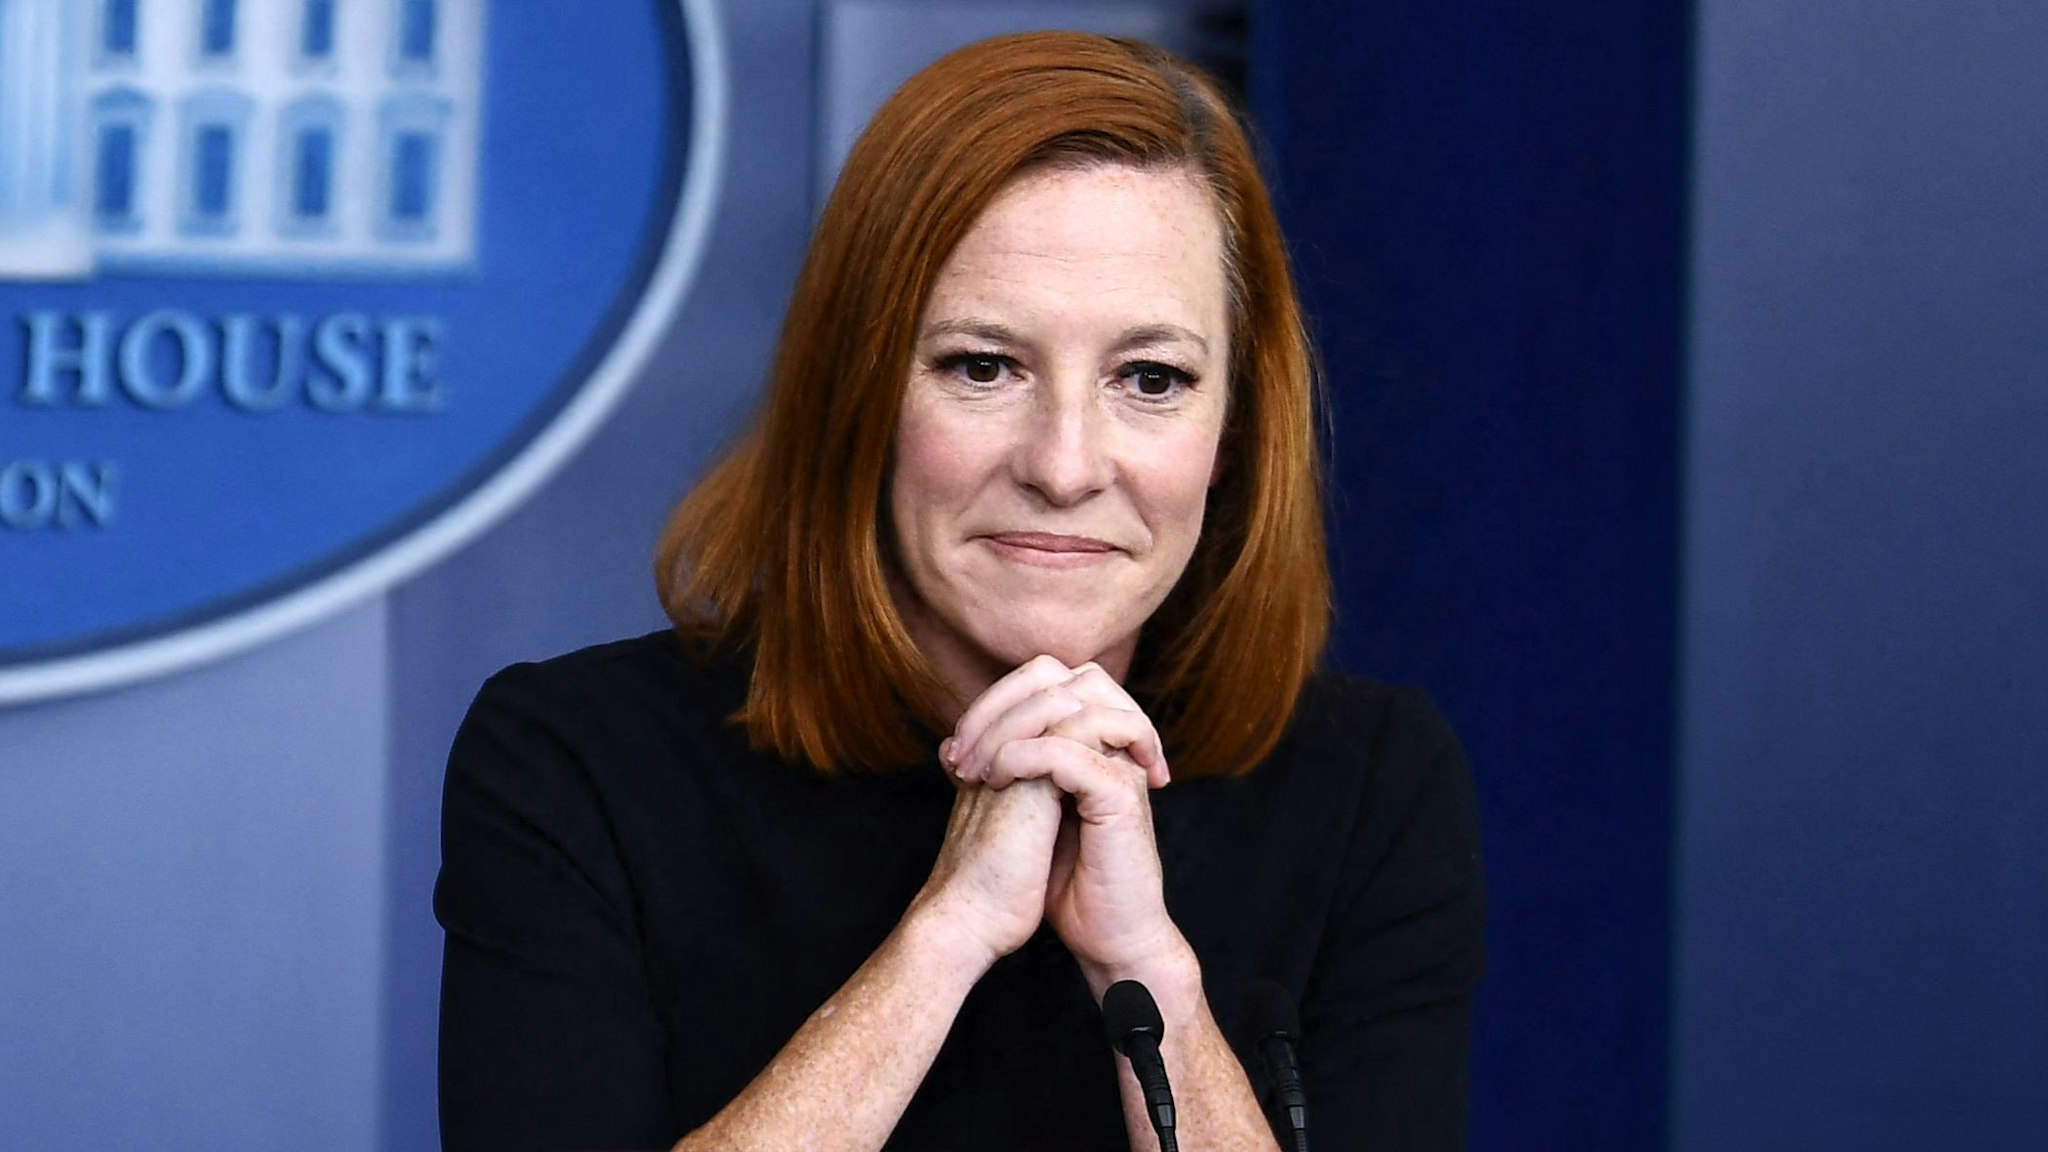 White House Press Secretary Jen Psaki speaks during the daily press briefing in the Brady Briefing Room of the White House in Washington, DC. on September 30, 2021.